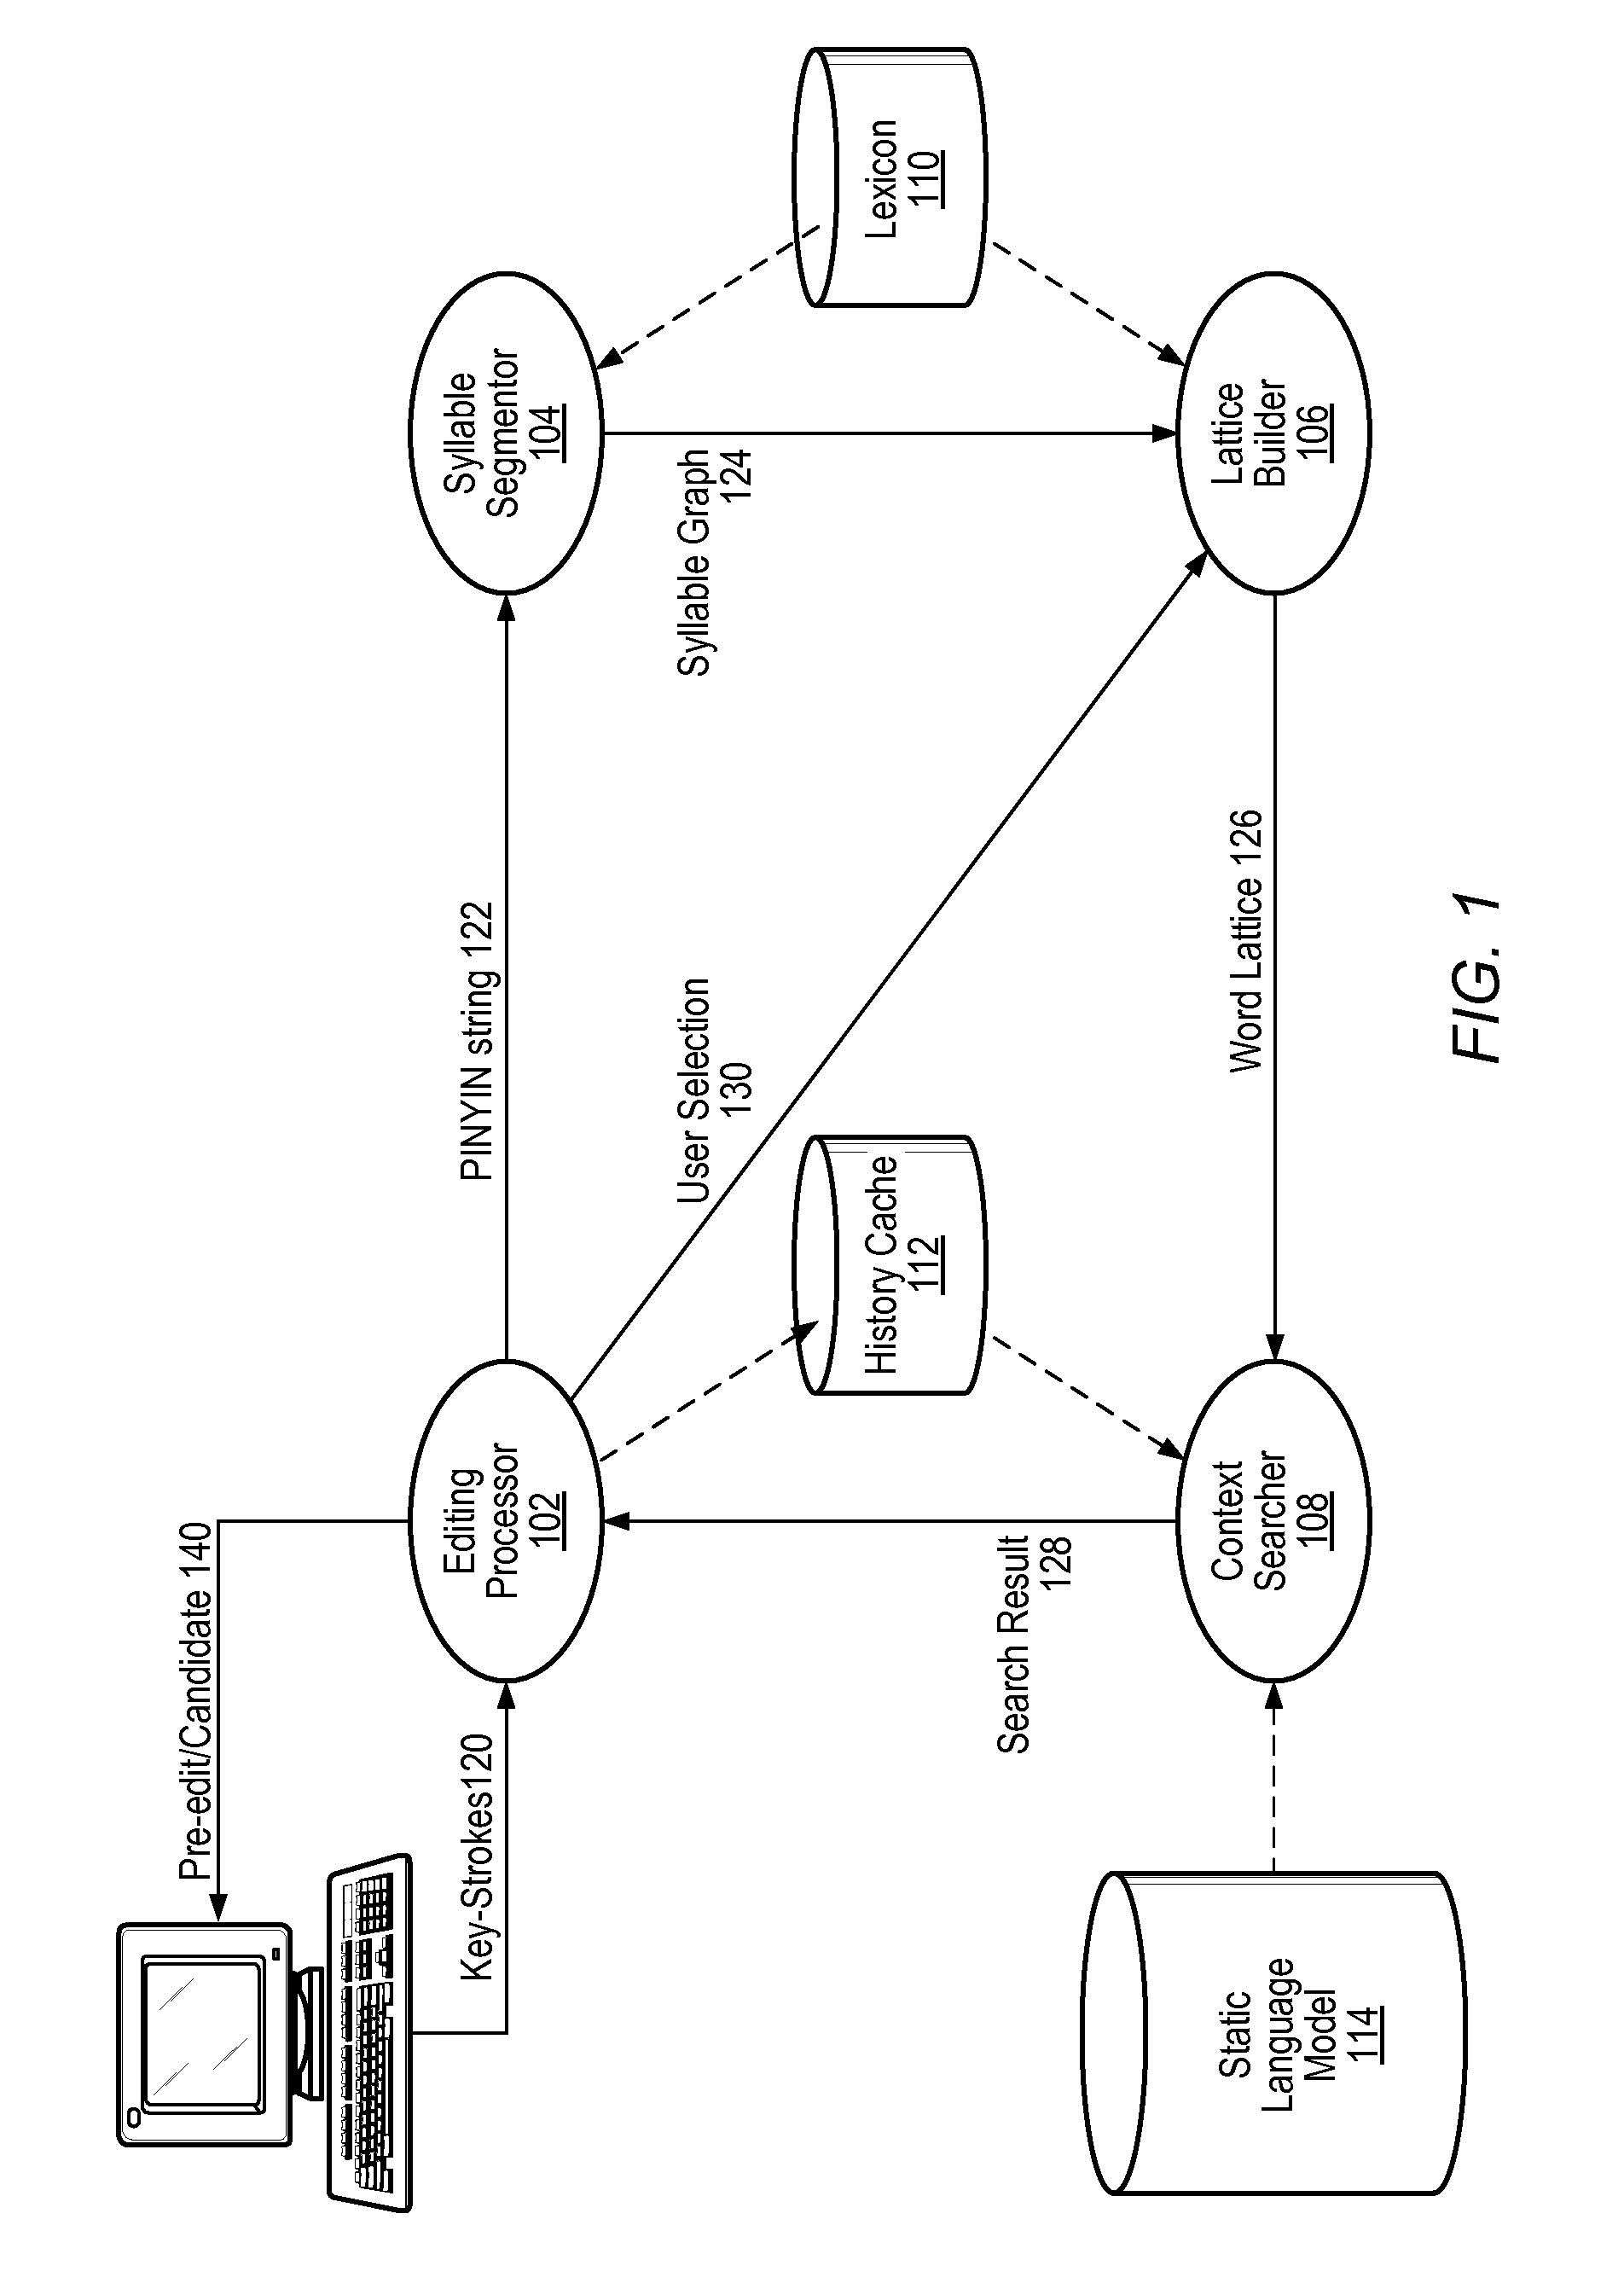 Method and apparatus for converting phonetic language input to written language output